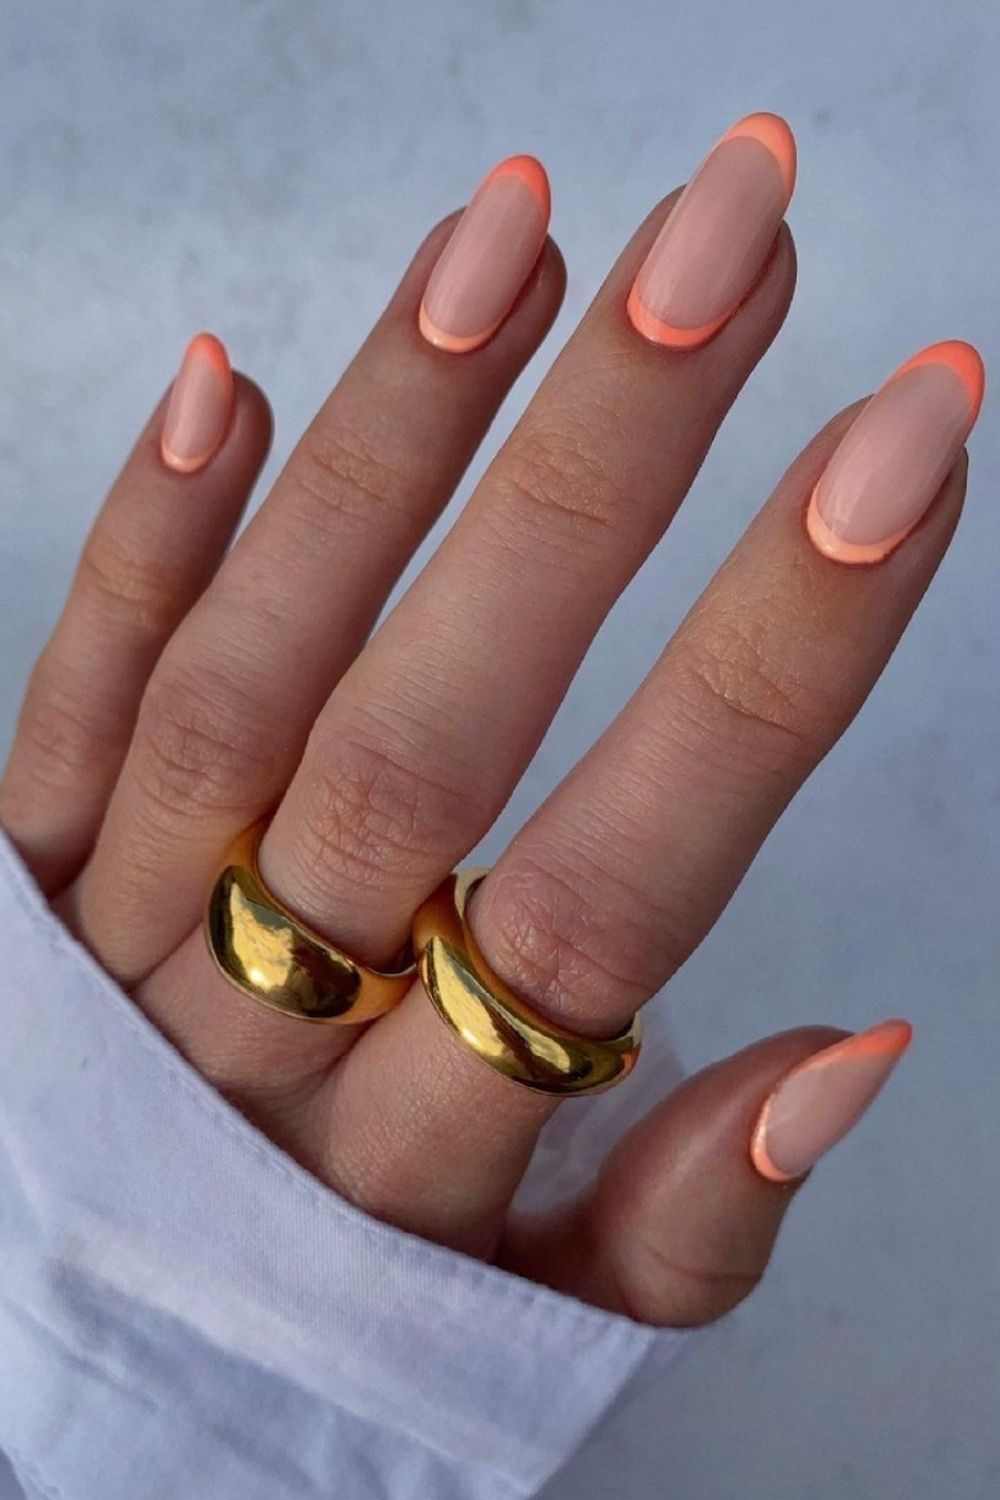 90+ Best Fall nail colors 2021 And Autumn nail design to fresh your looks